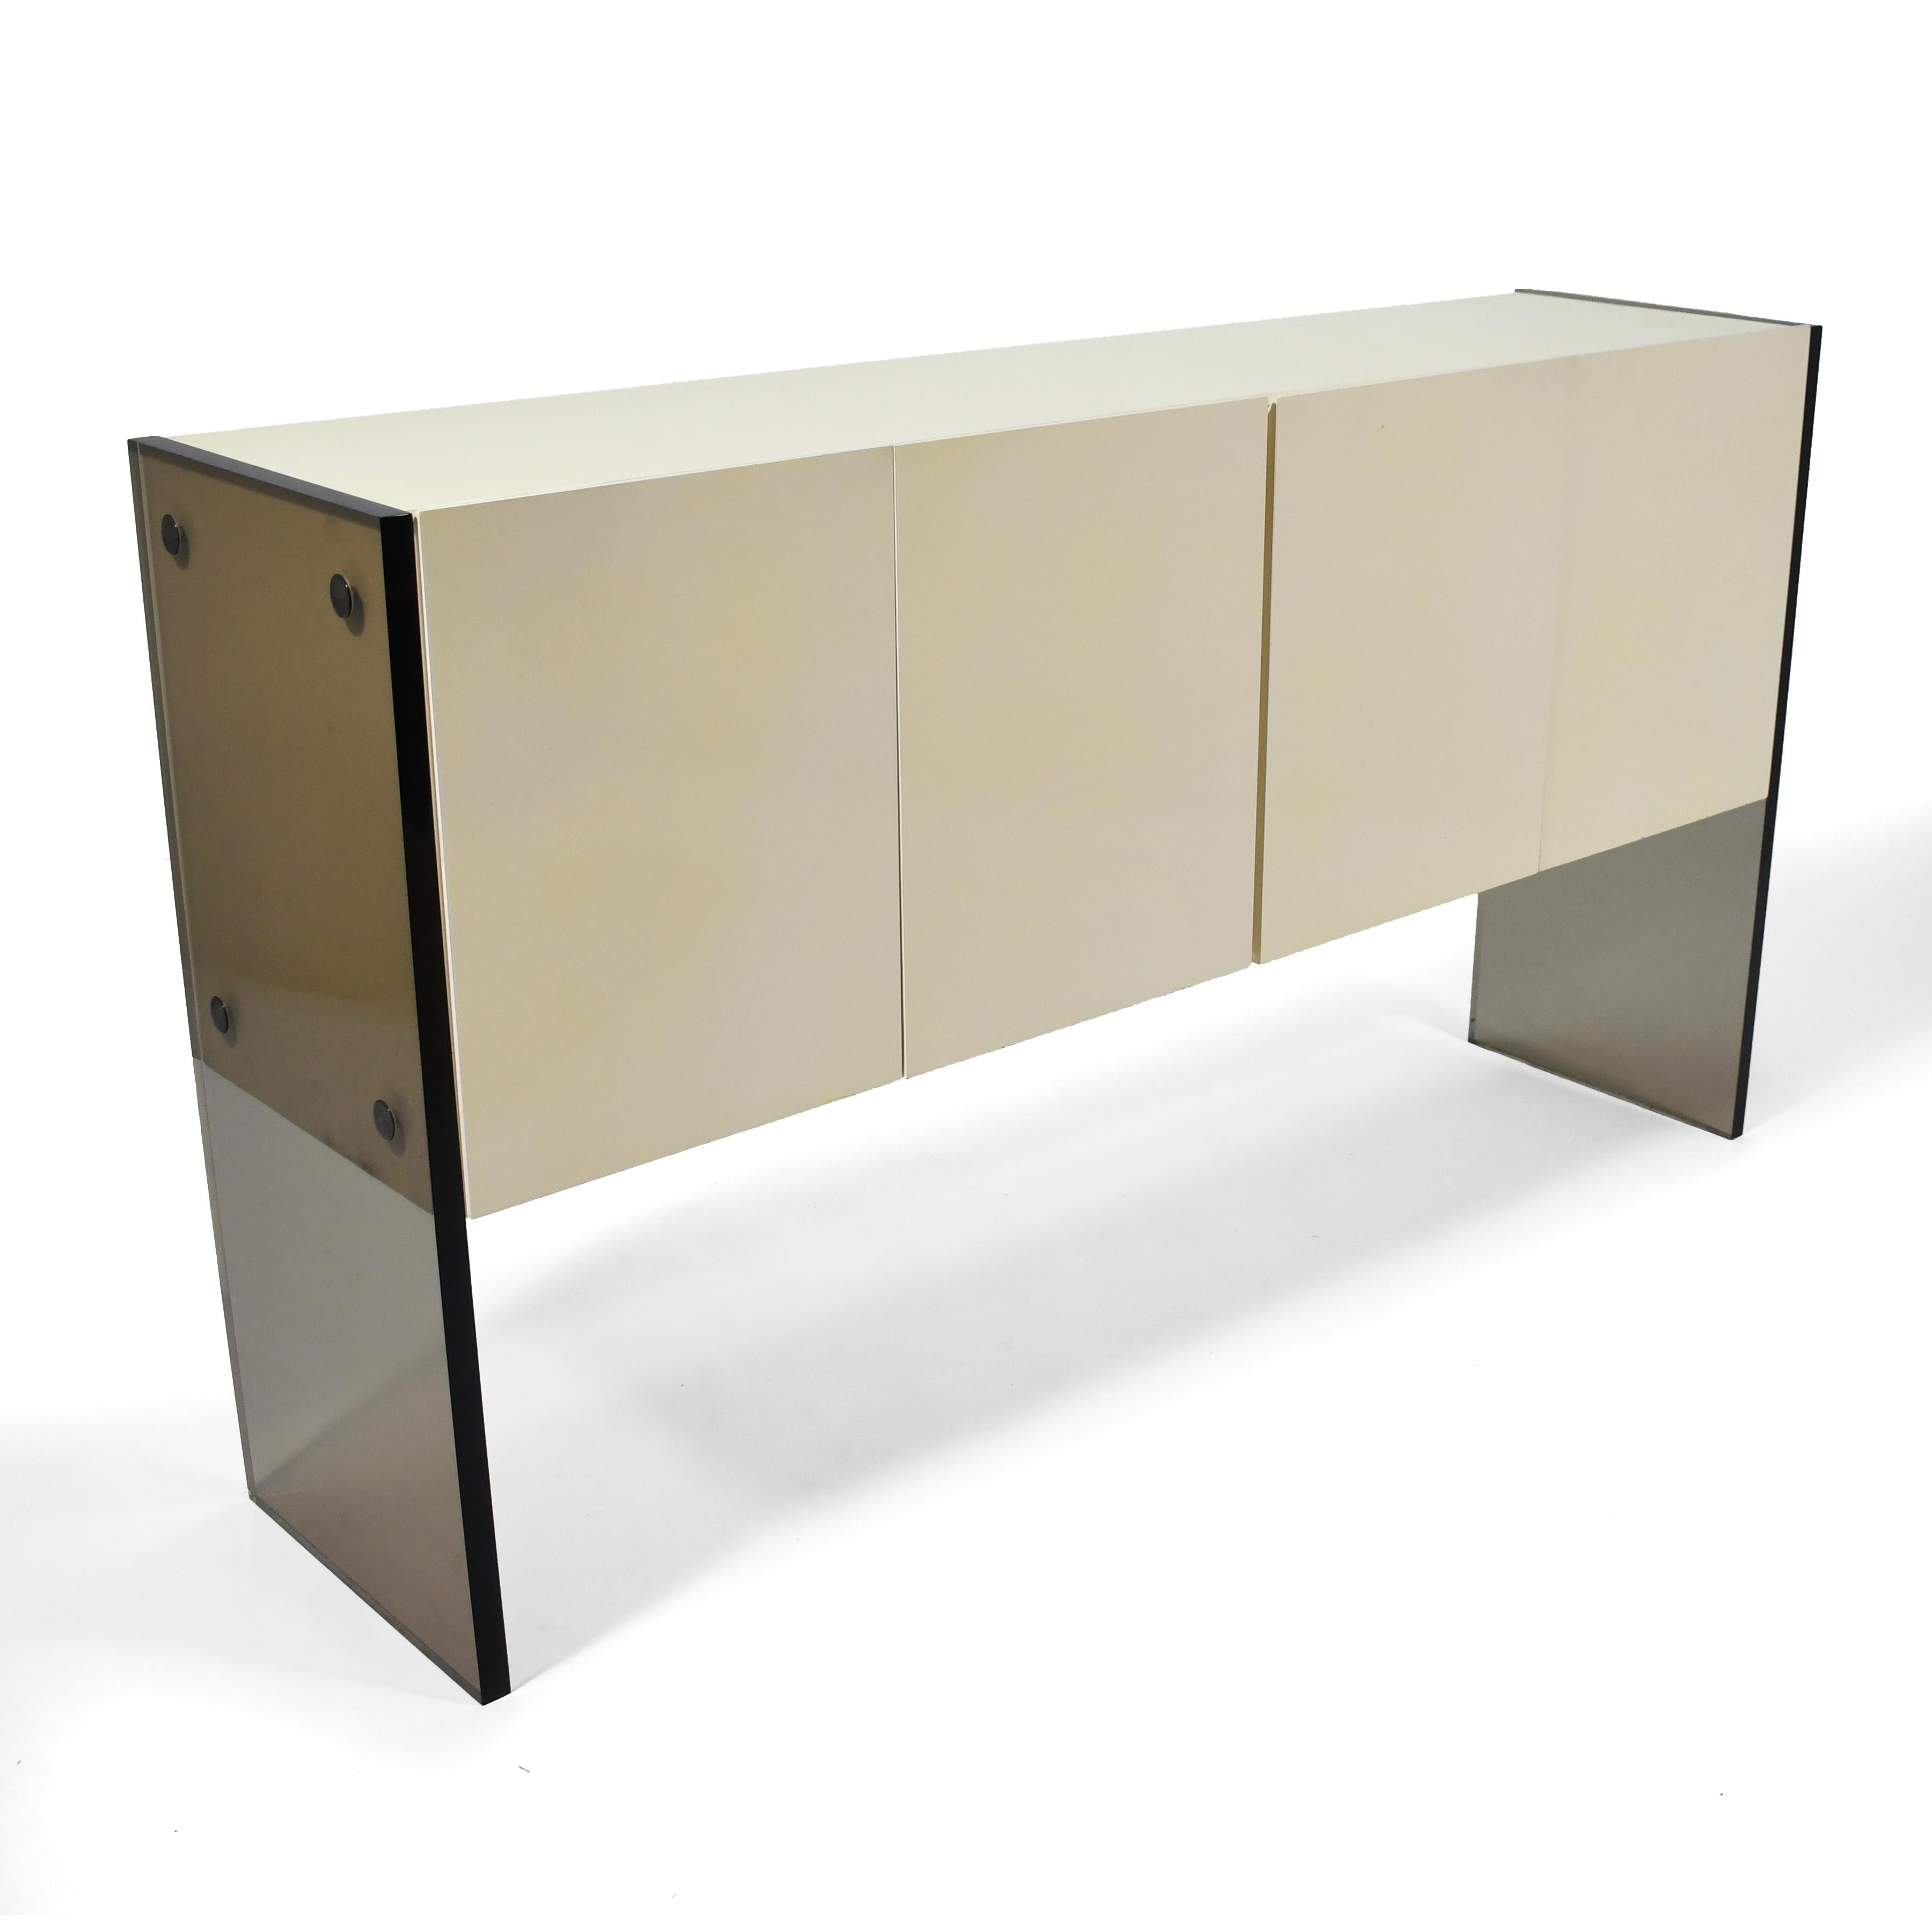 A strikingly beautiful minimalist design by Milo Baughman for Thayer Coggin, this credenza has a two-door cabinet in ivory lacquer suspended by legs of smoked lucite. Interior features an adjustable shelf, utensil drawers, and storage